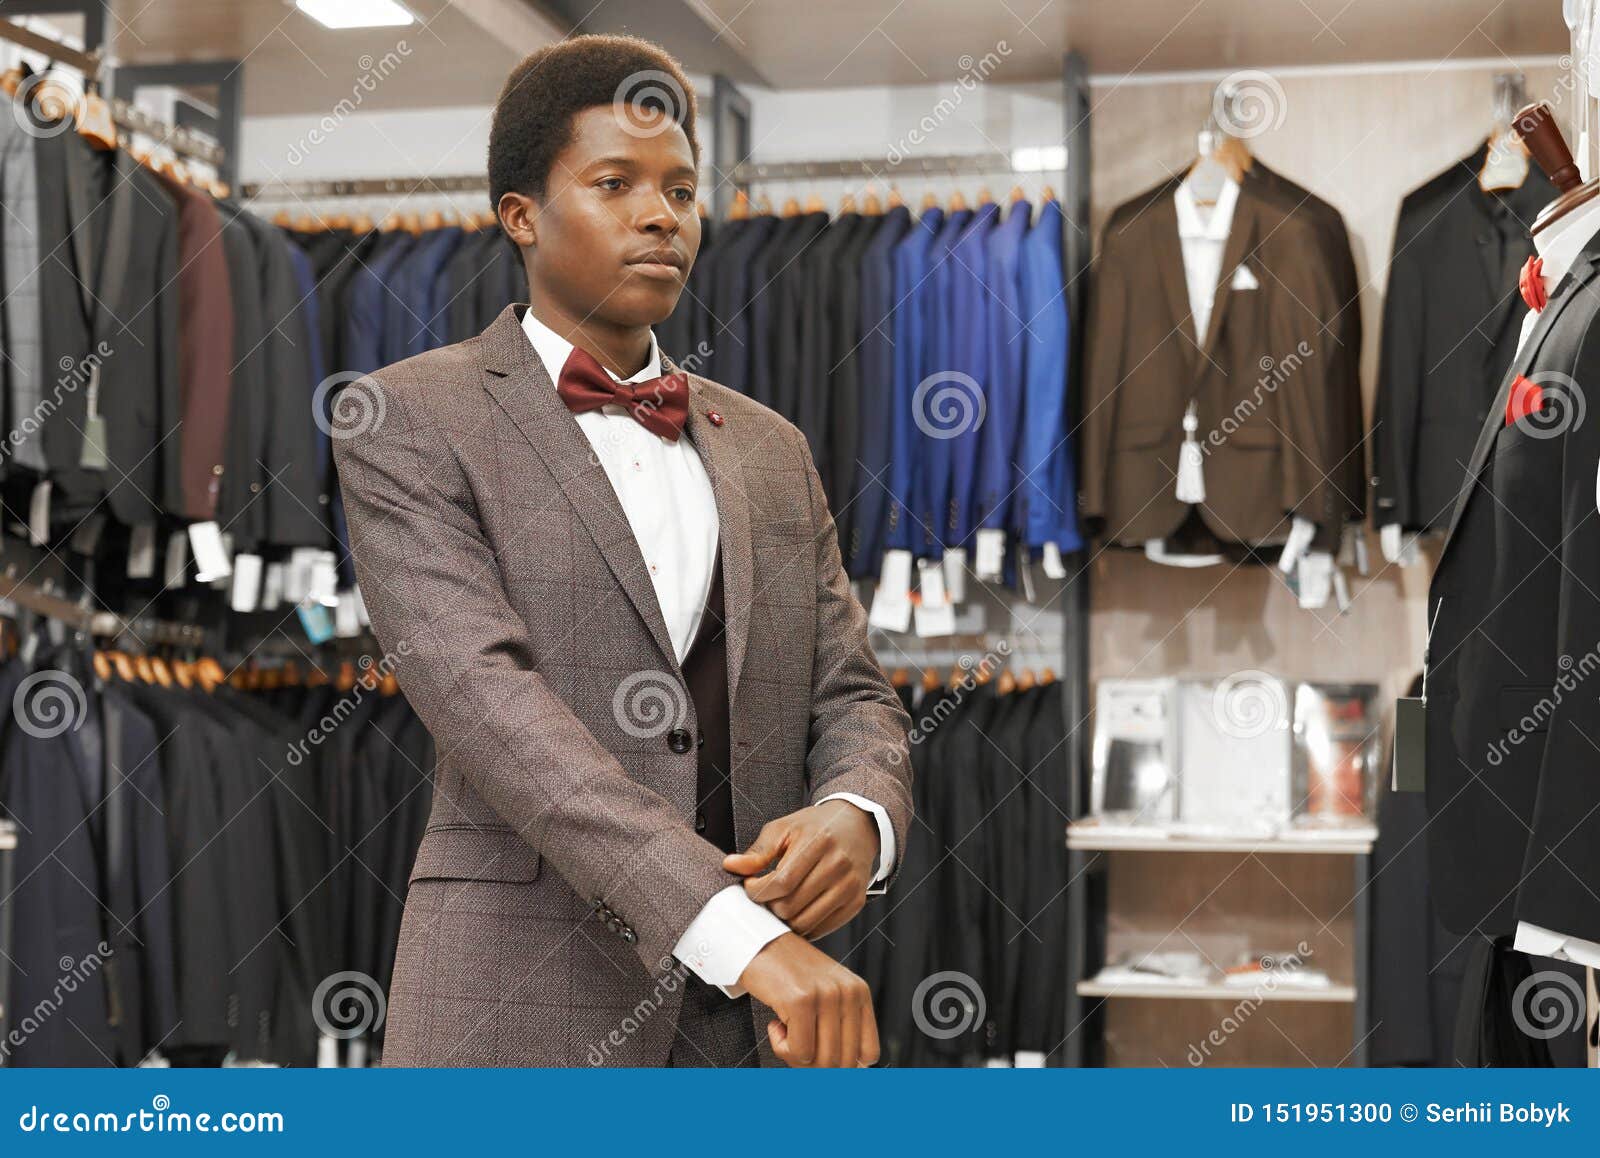 African Man Choosing Elegant Suit in Fashionable Boutique. Stock Photo ...